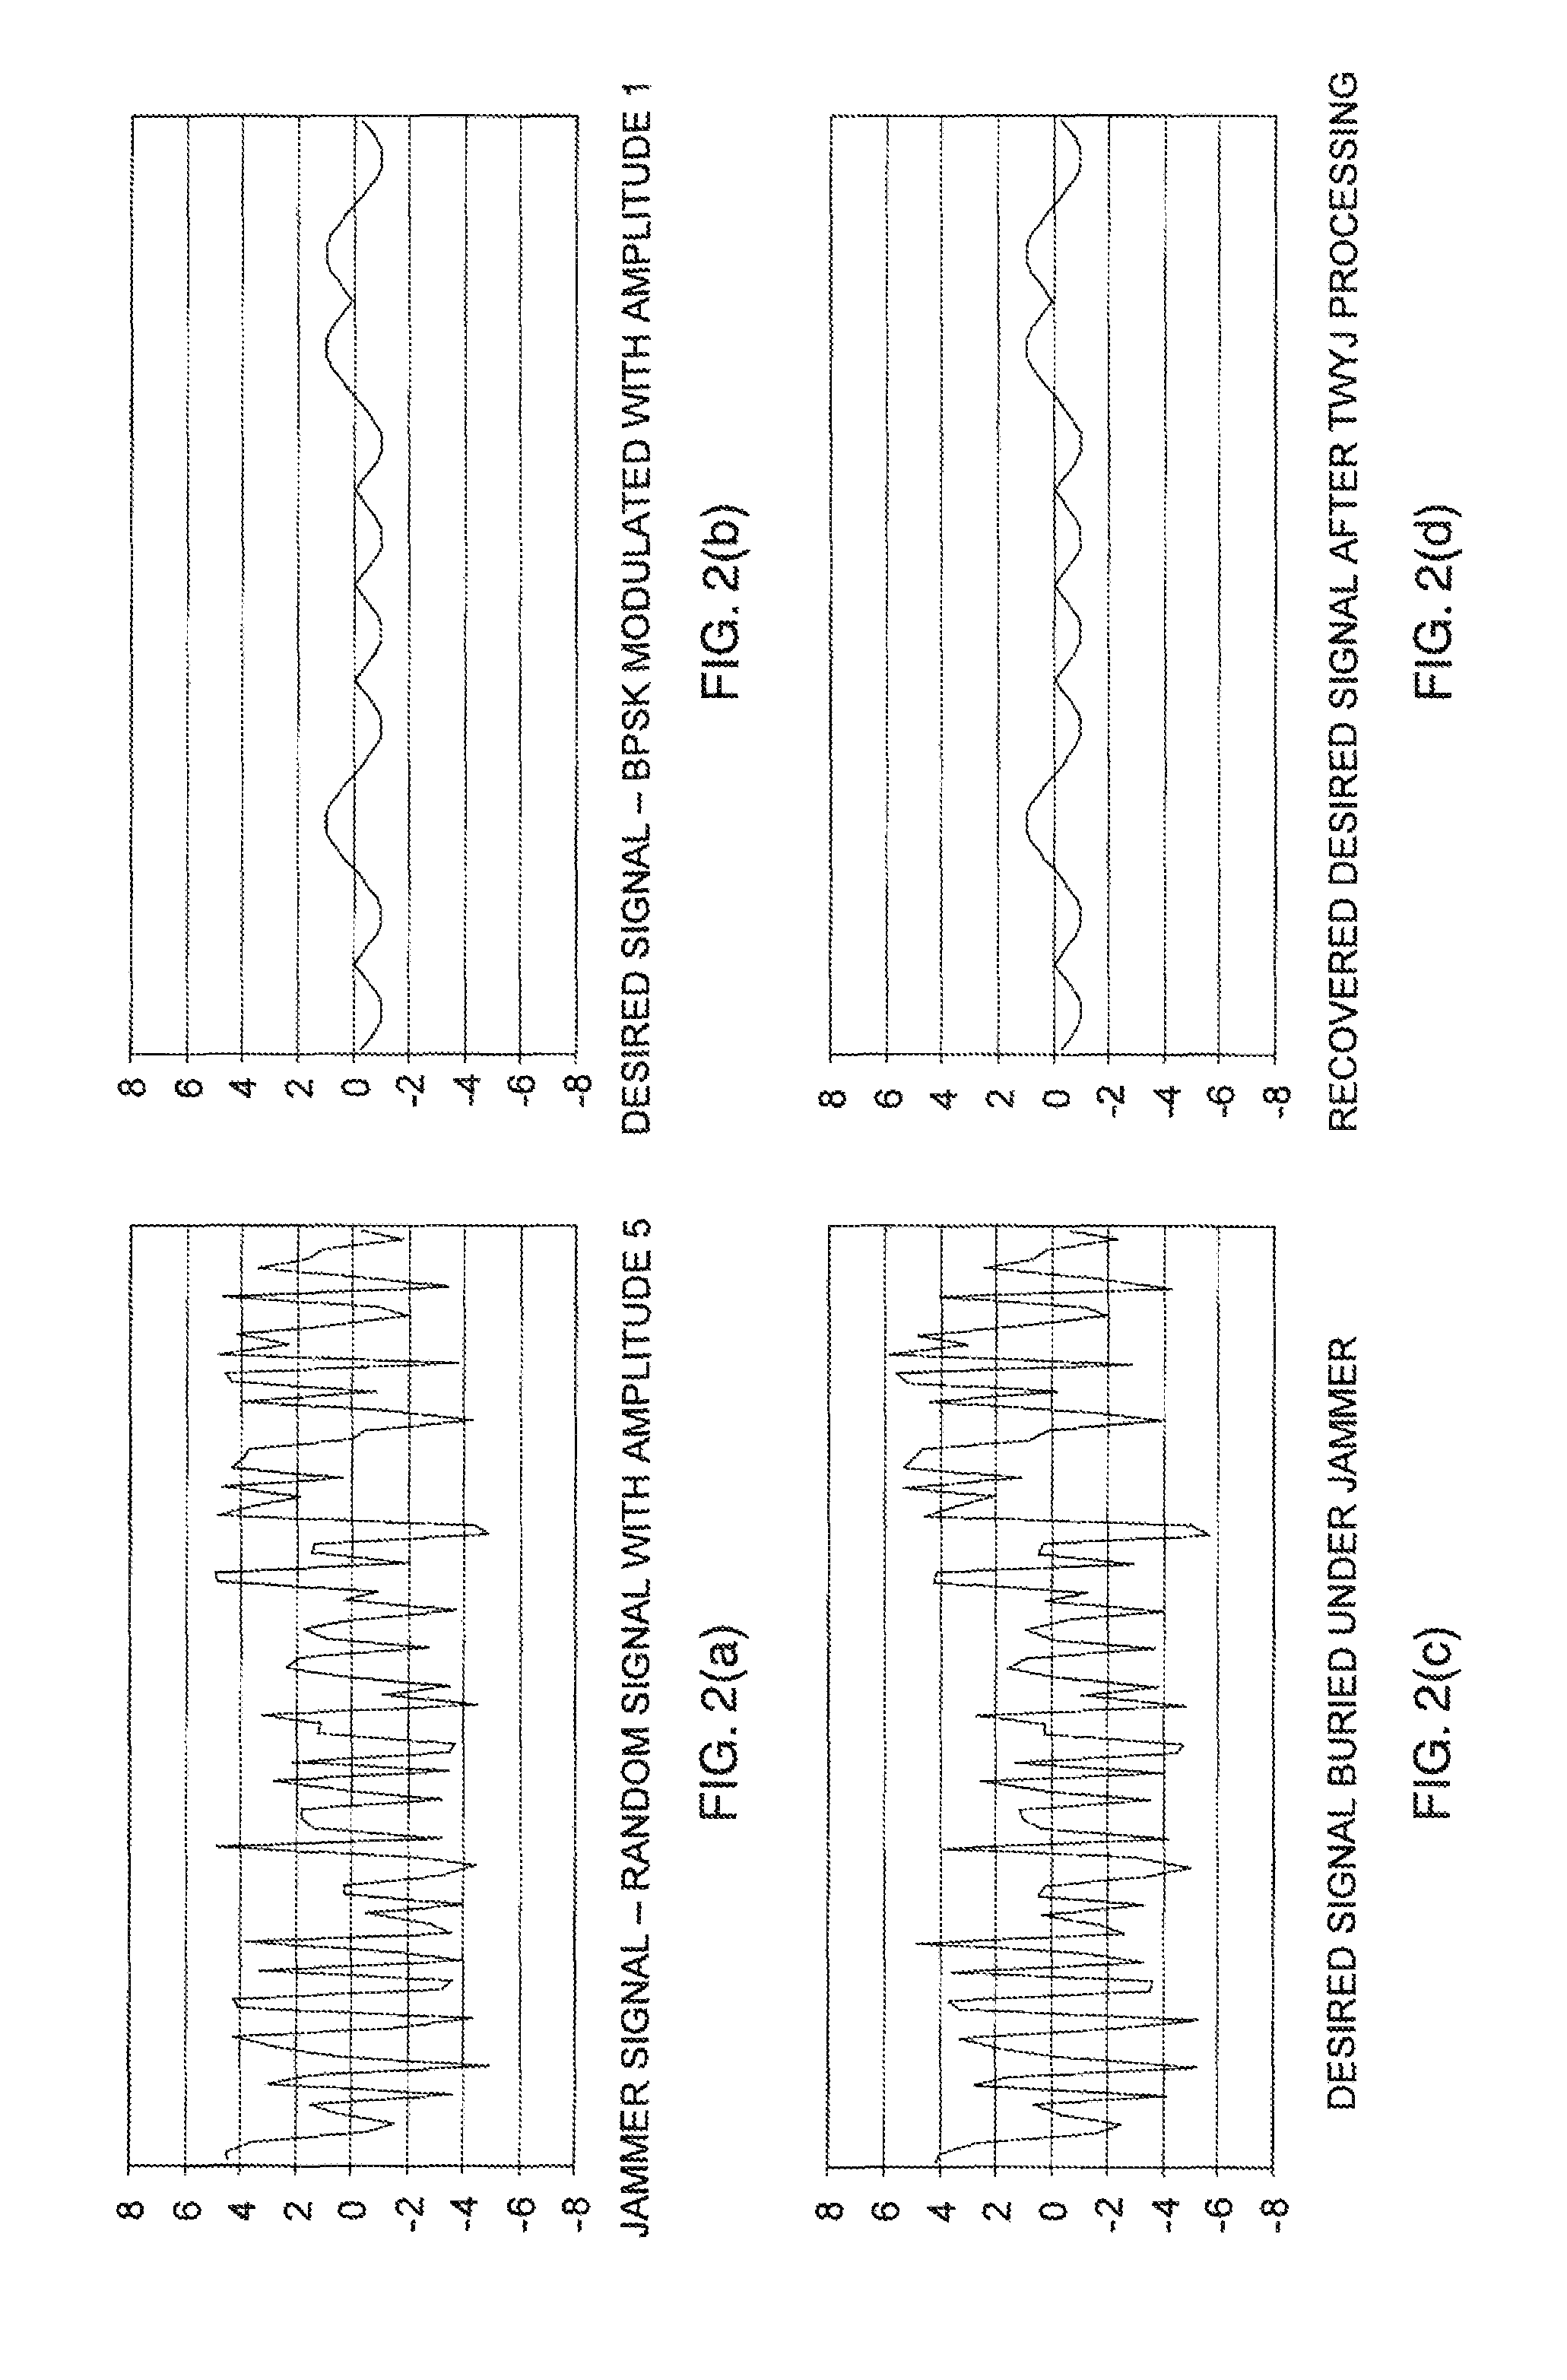 Tactical radio and radio network with electronic countermeasures